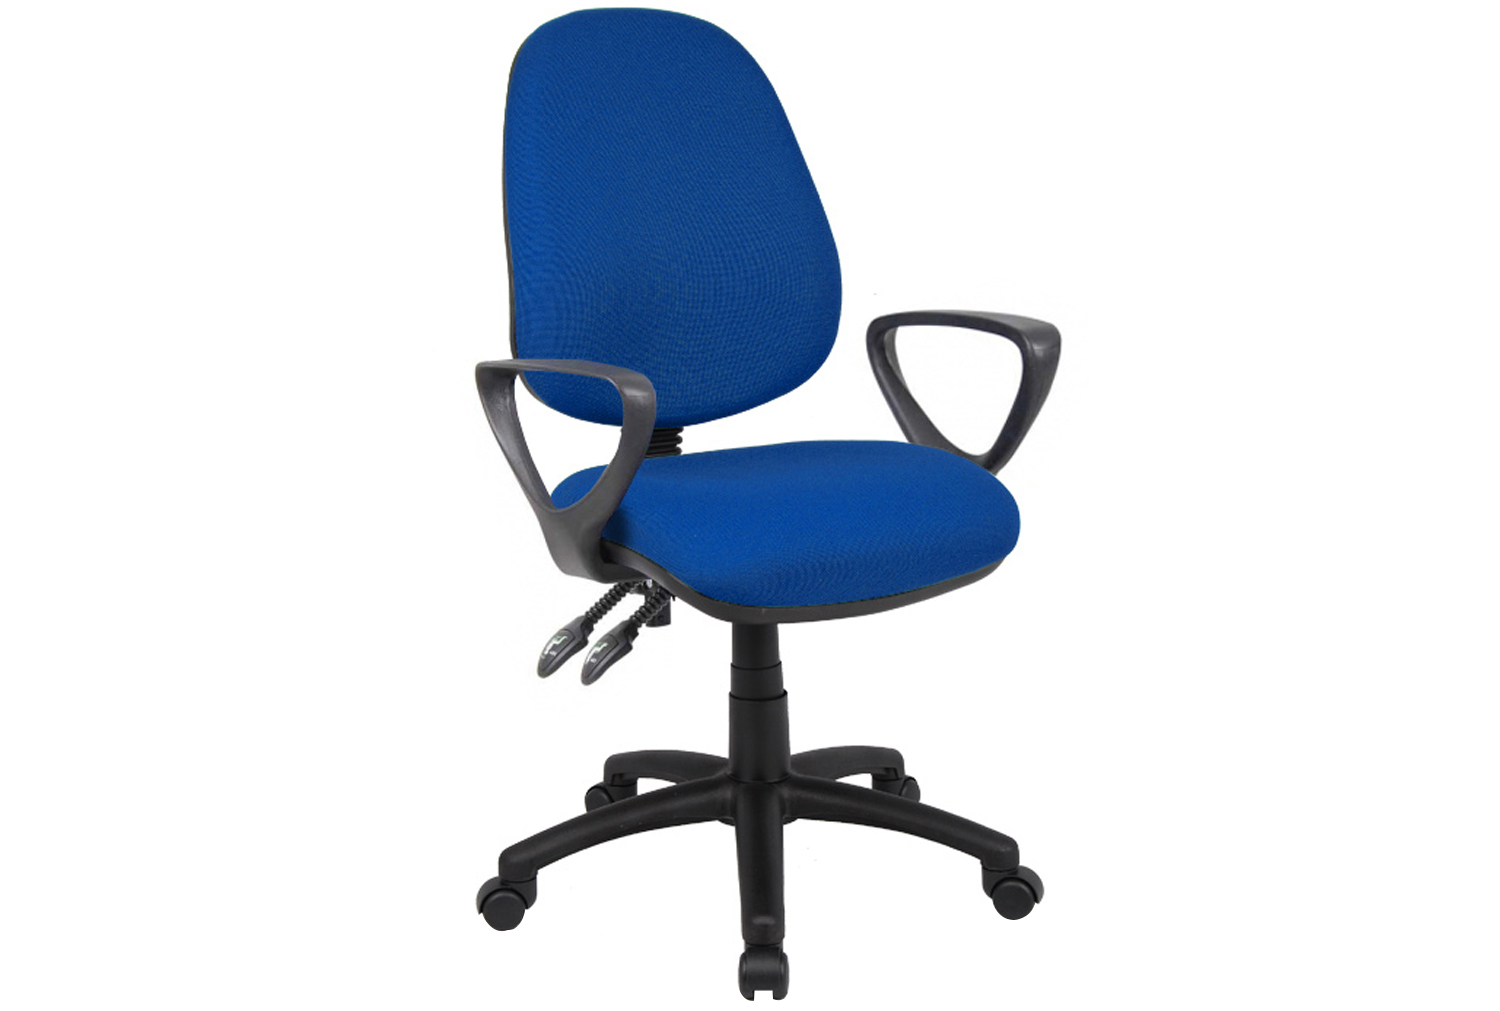 Full Lumbar 2 Lever Operator Office Chair With Fixed Arms, Blue, Express Delivery